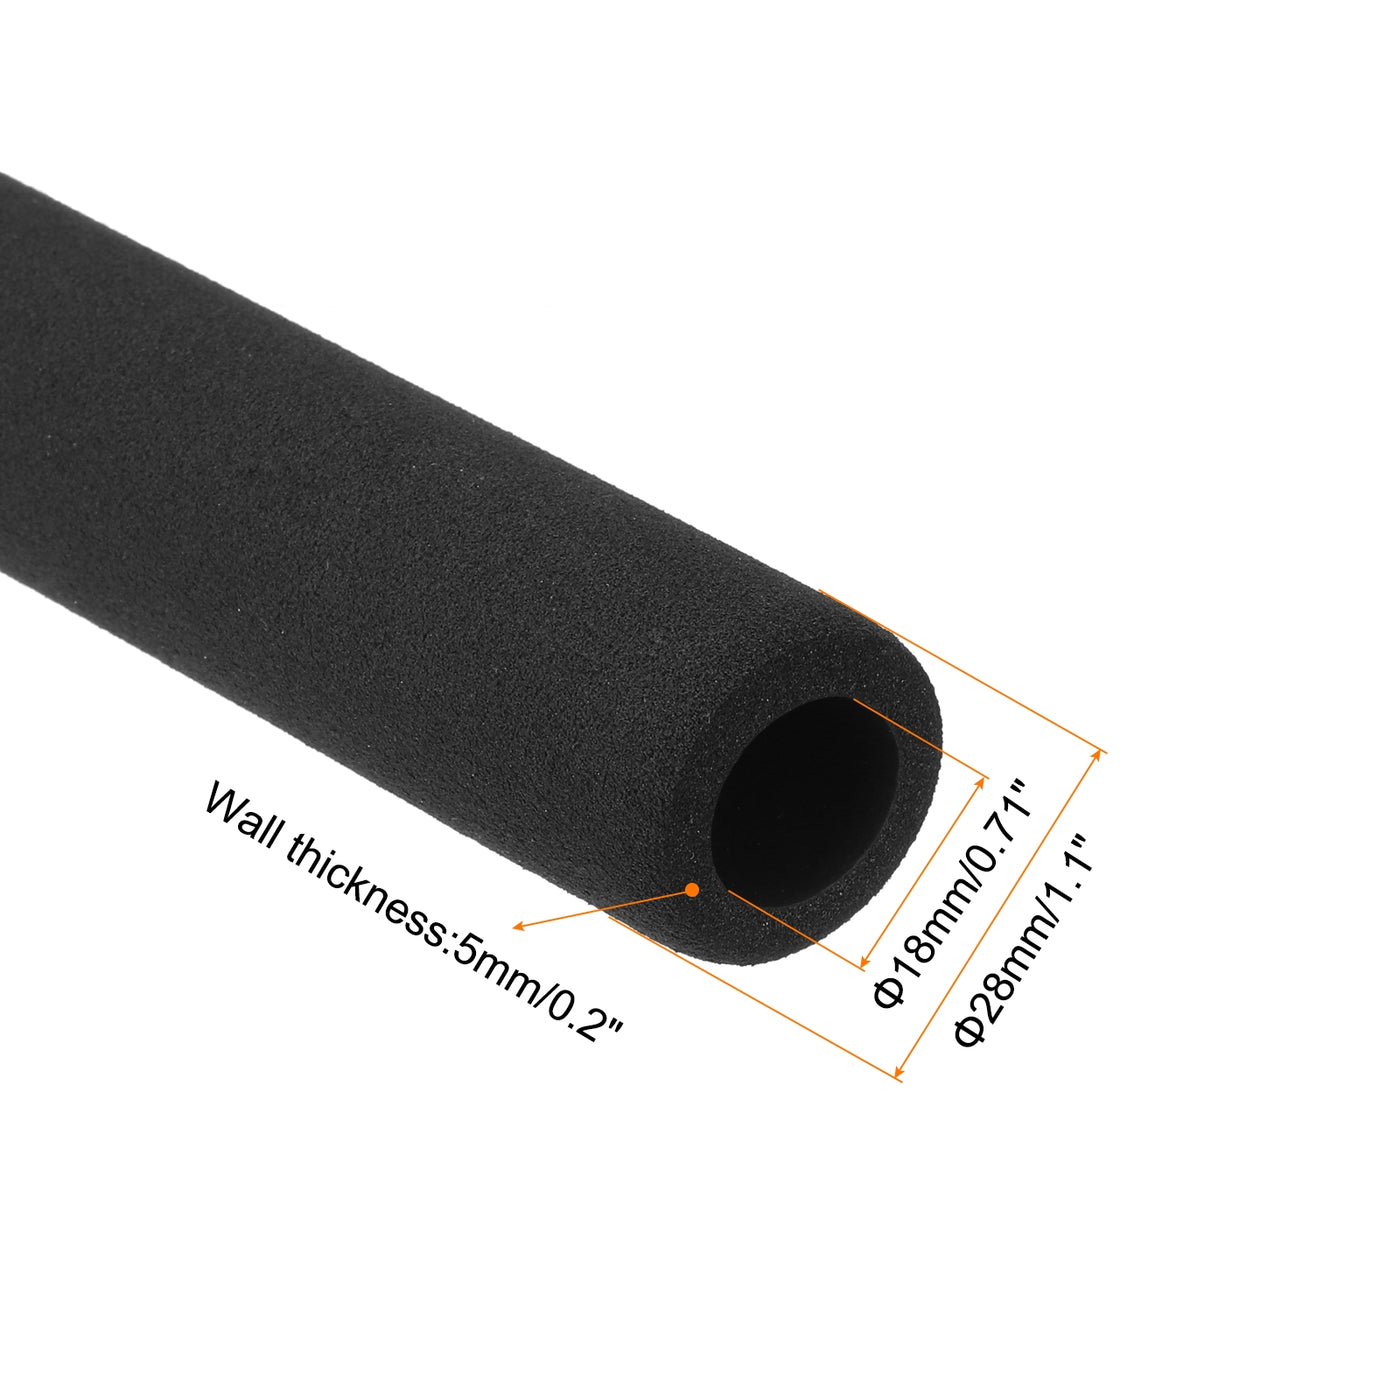 uxcell Uxcell Pipe Insulation Tube Foam Tubing for Handle Grip Support 18mm ID 28mm OD 200mm Heat Preservation Black